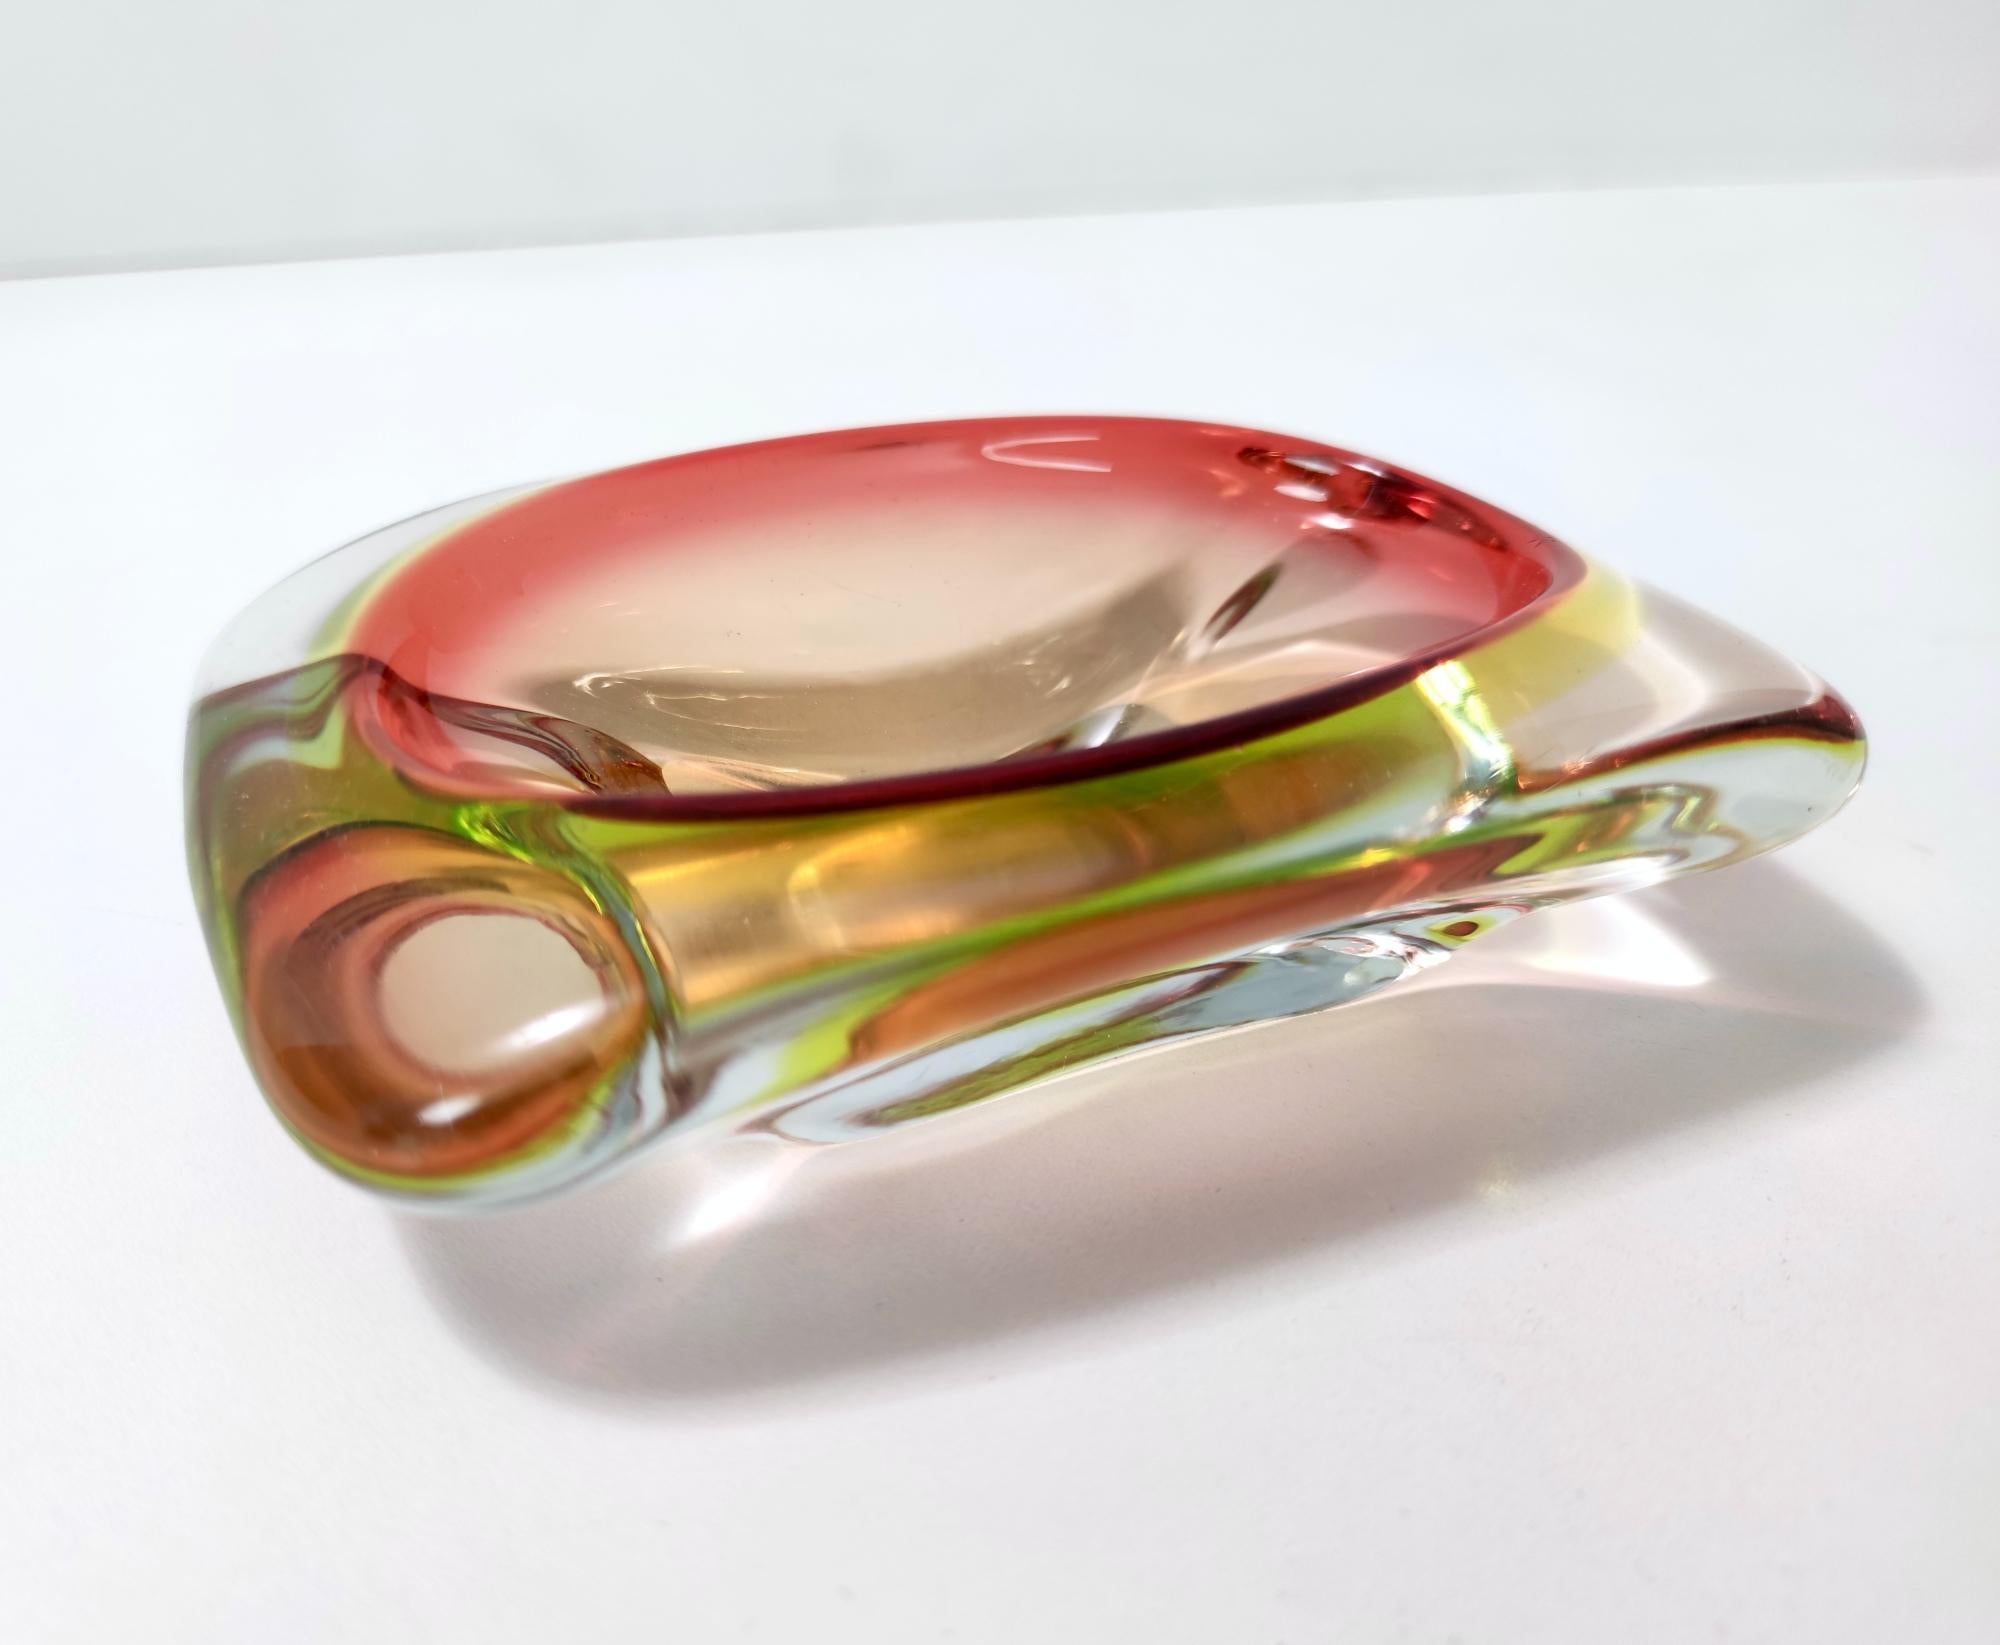 Italian Orange Red Sommerso Glass Ashtray or Catchall Ascribable to Flavio Poli, Italy